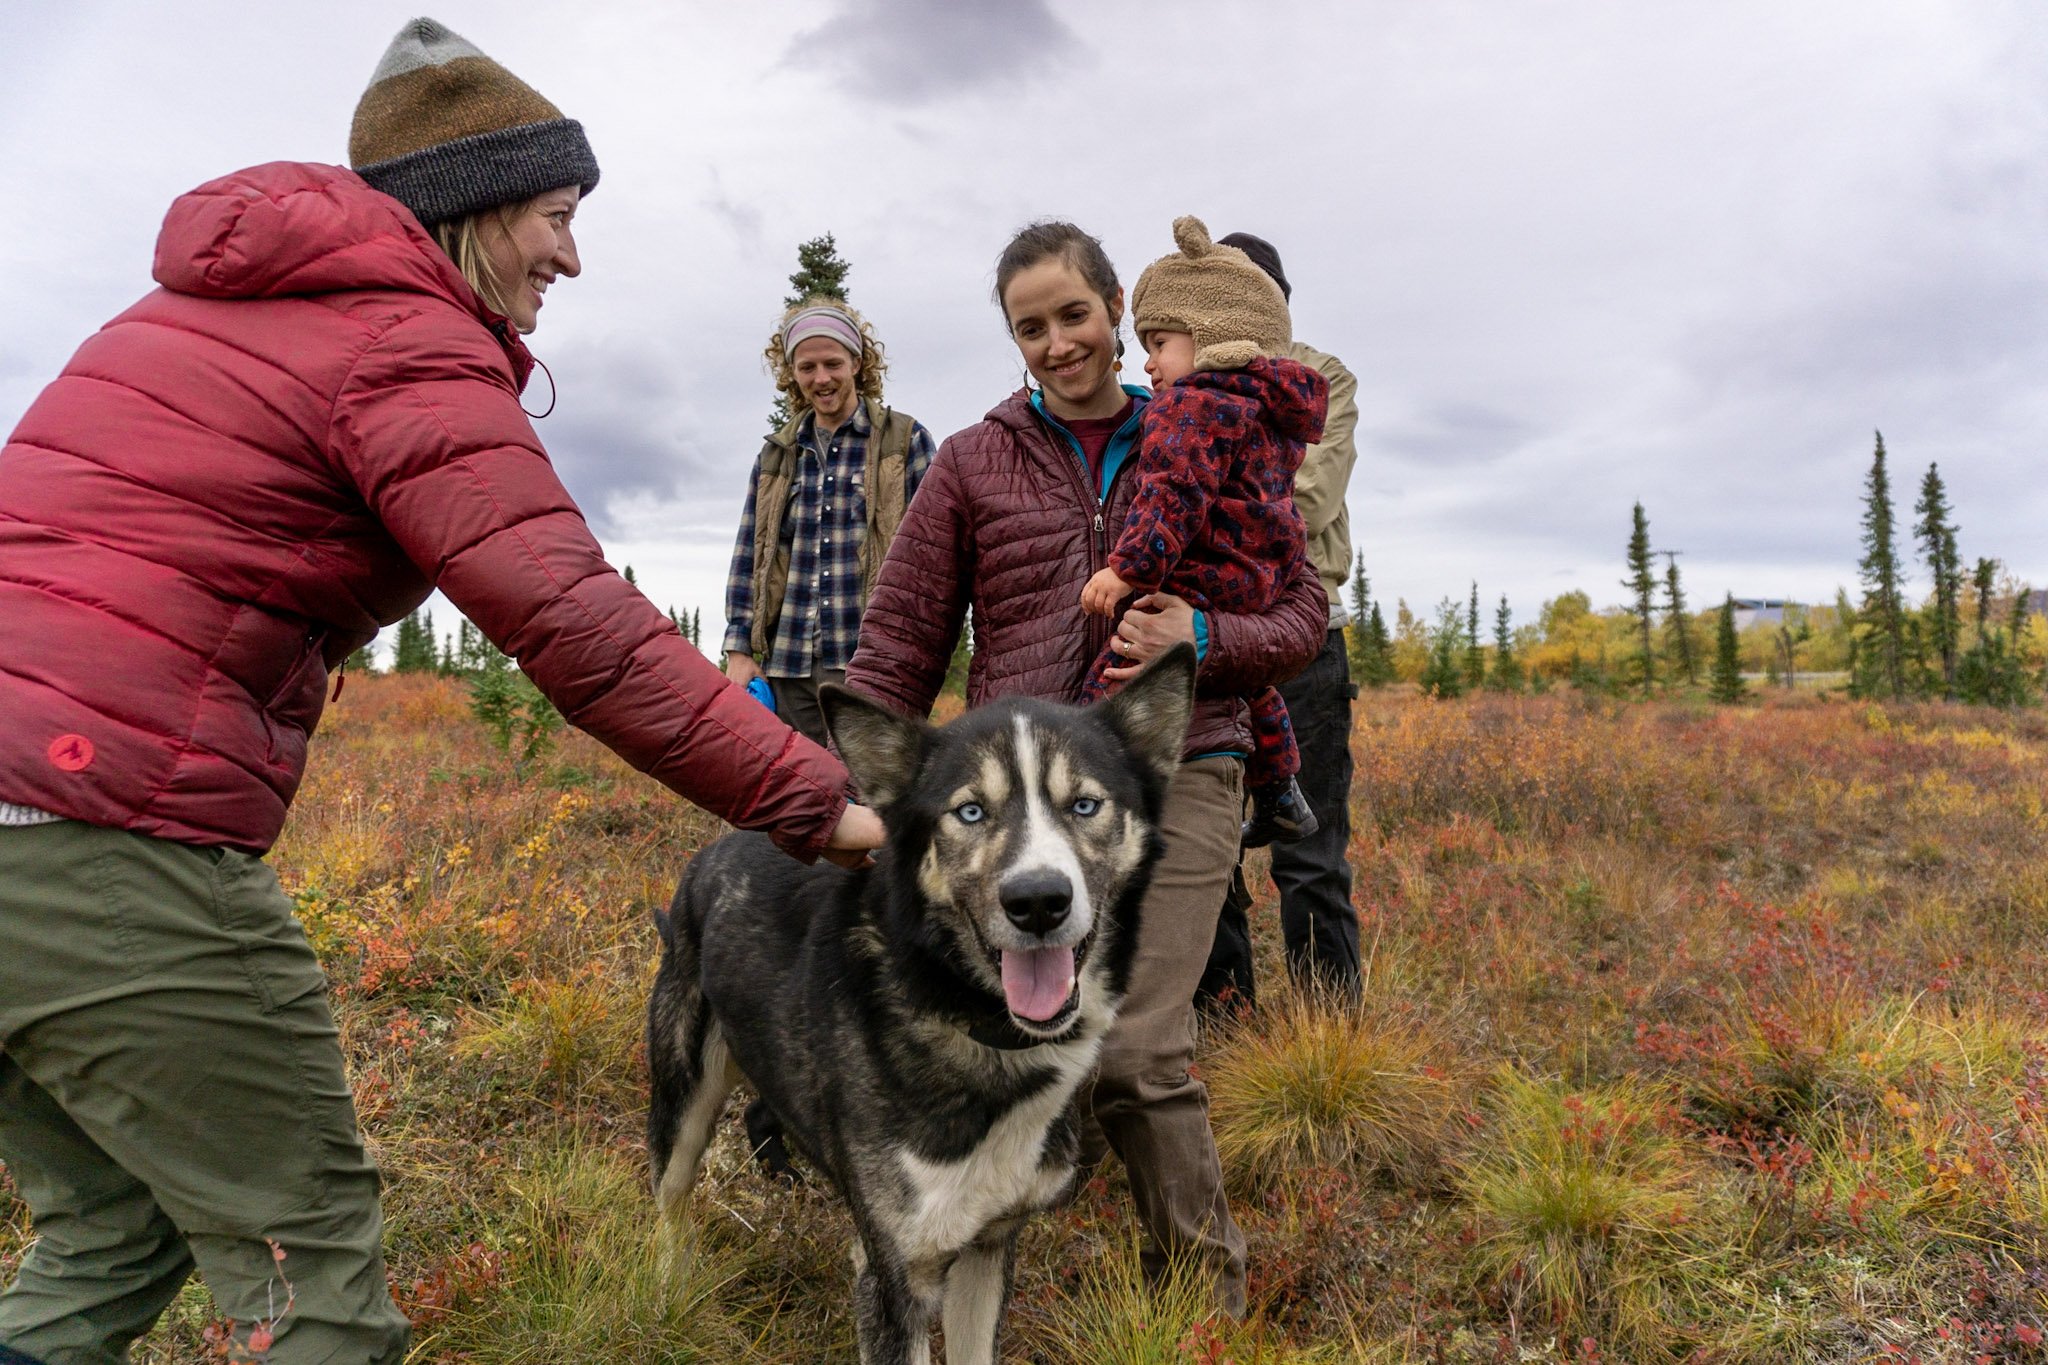 A group of people representing all ages and genders pet an Alaskan husky sled dog that was born in Denali National Park